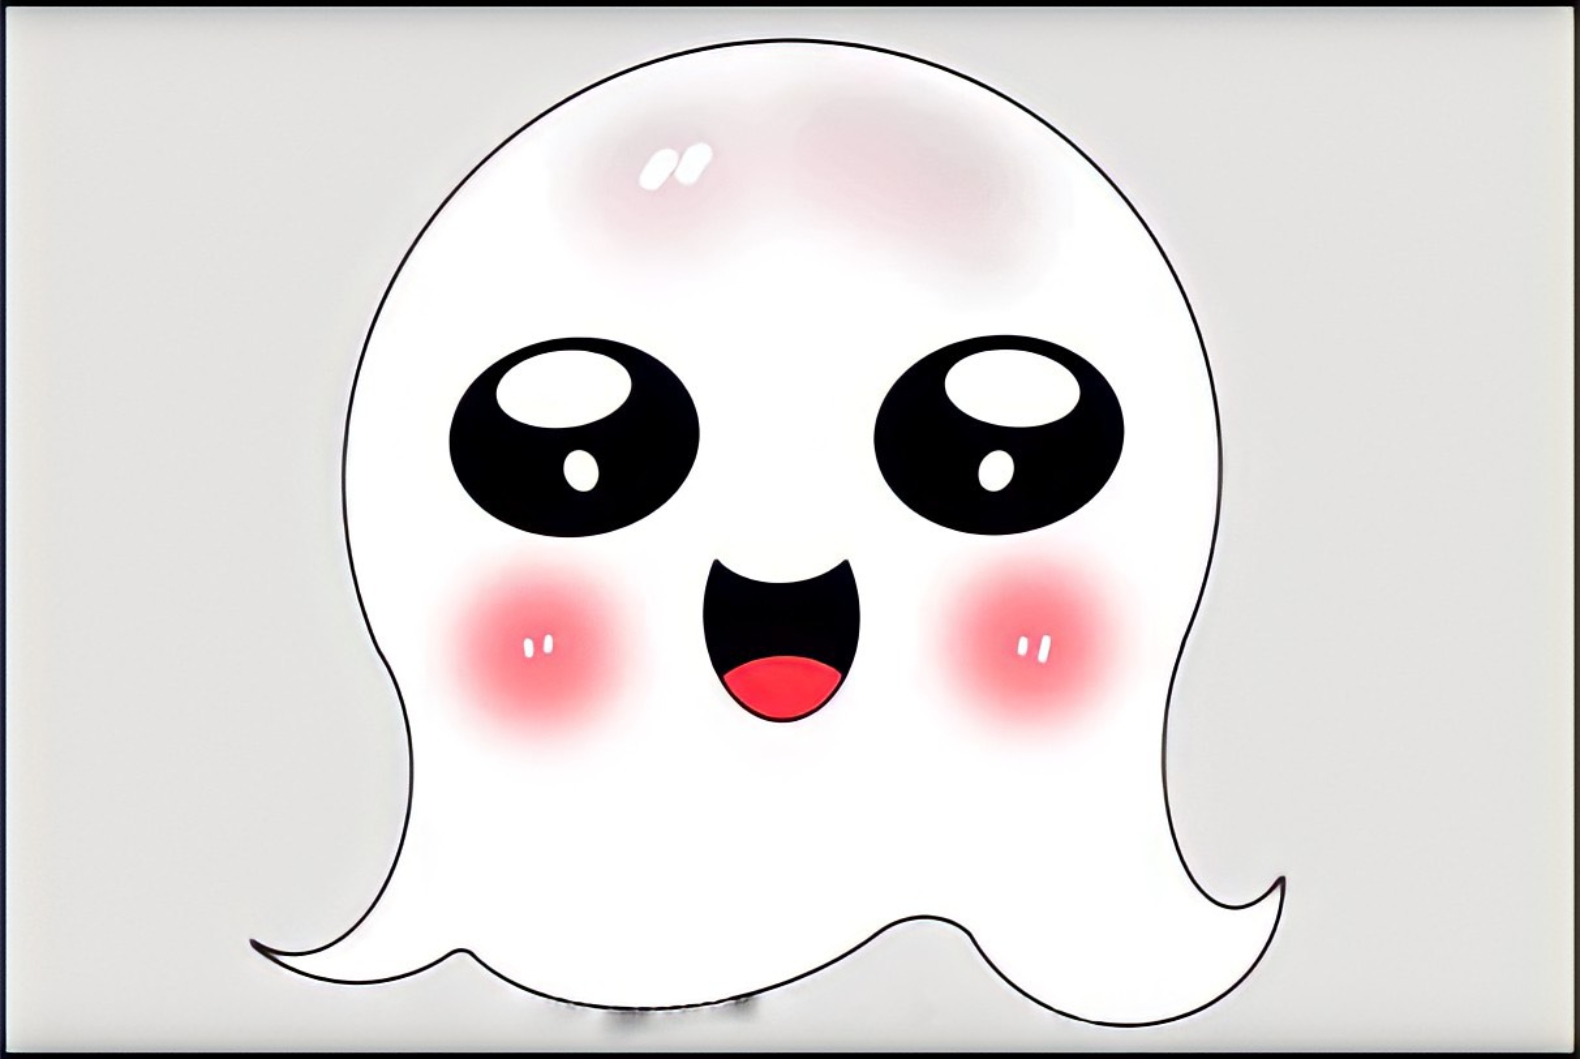 Hướng dẫn vẽ con ma  drawing halloween How to Draw a Cute Ghost Easy   Thư Nguyễn  YouTube